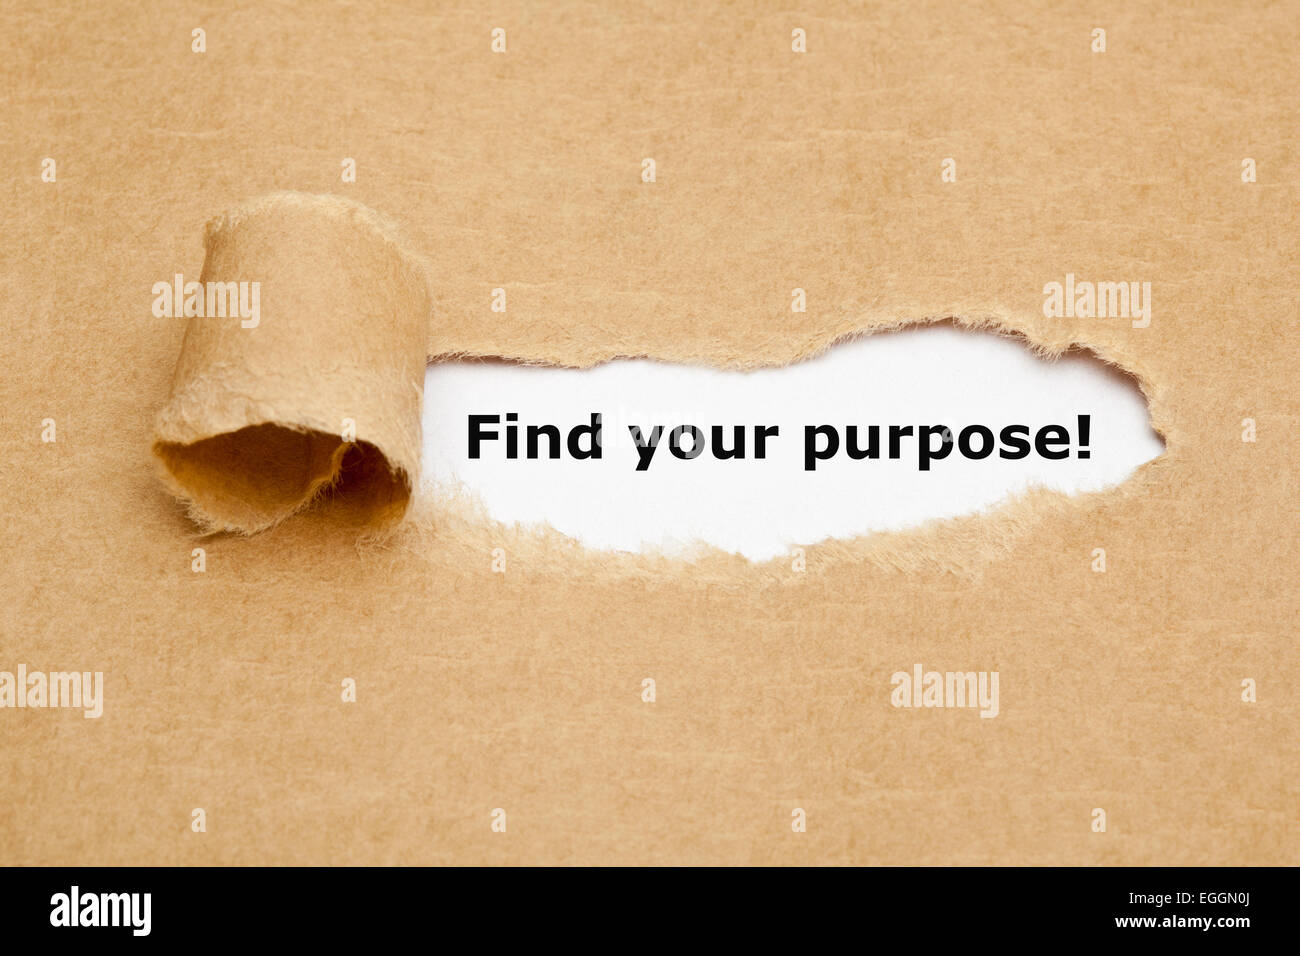 'Find your purpose' appearing behind torn brown paper. Stock Photo